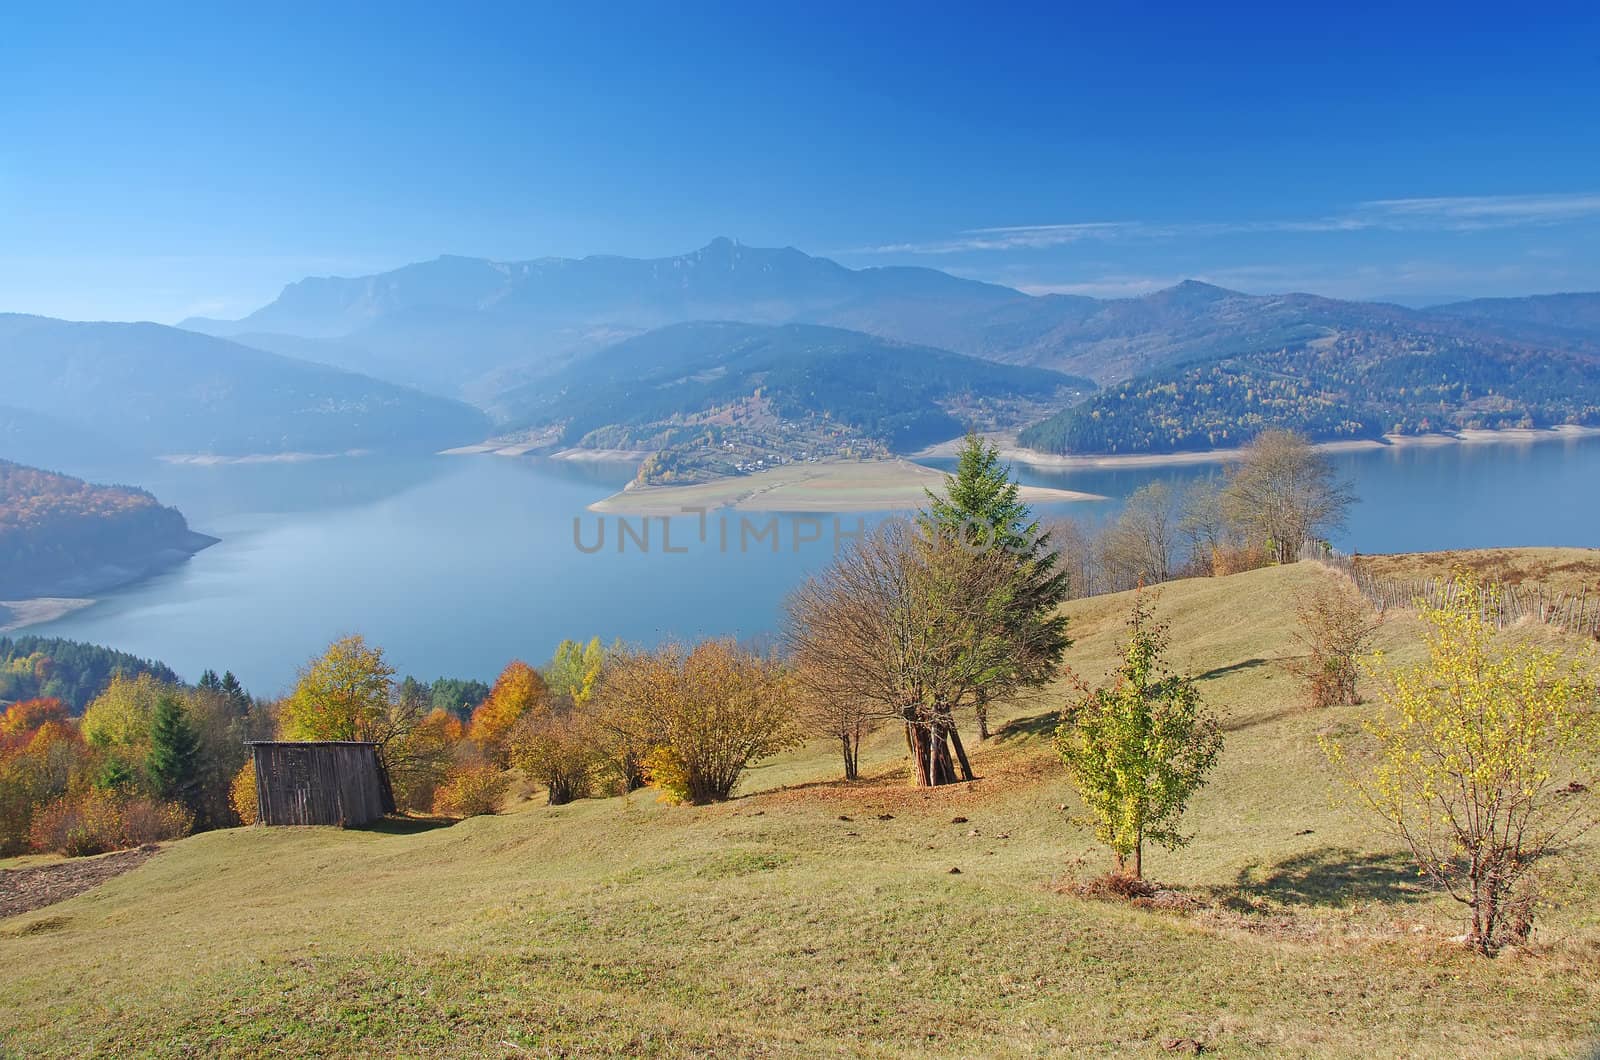 Autumnal landscape with lake and mountains.